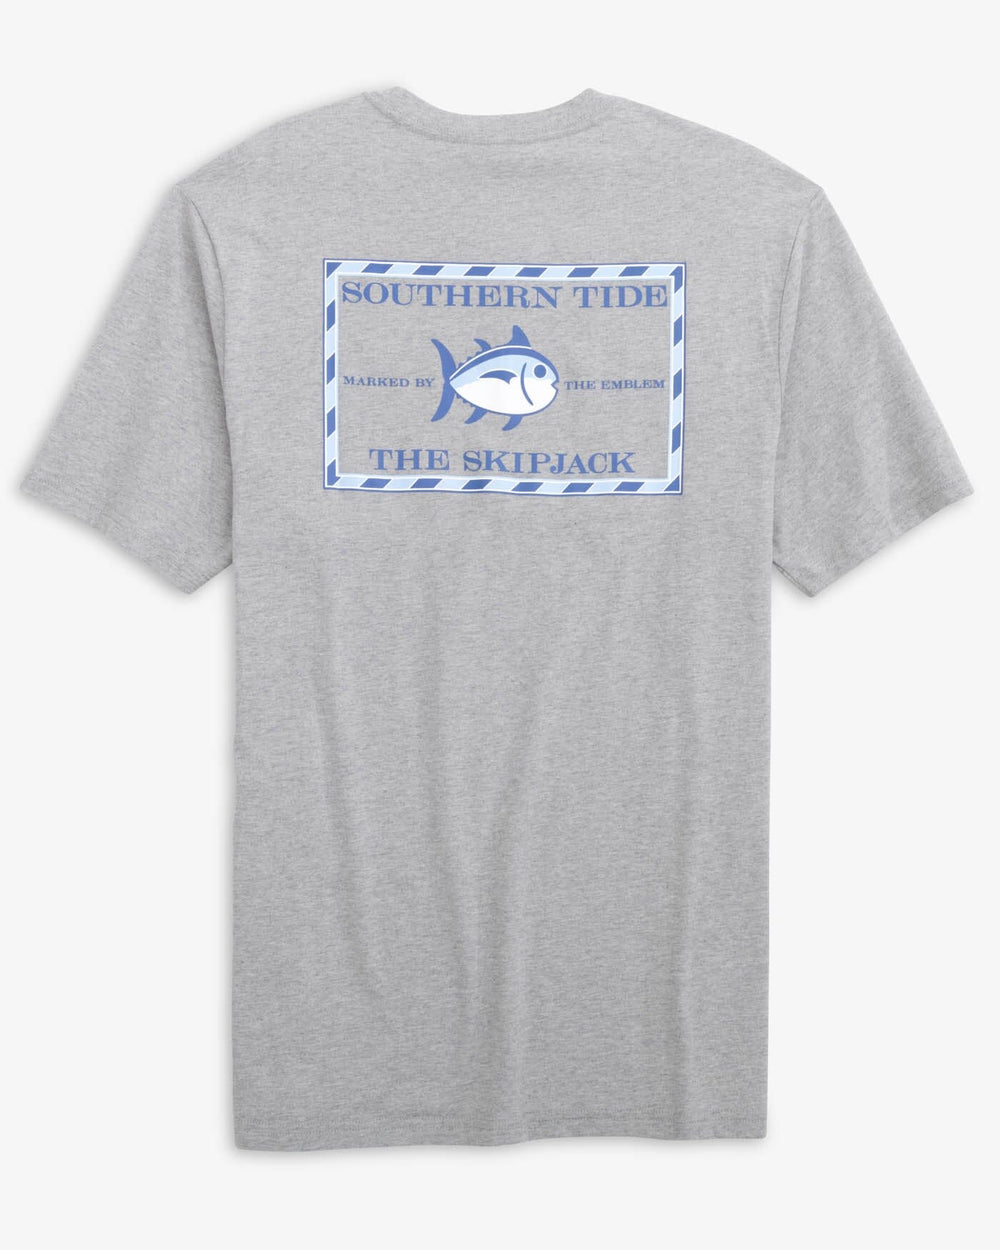 The back view of the Southern Tide Heathered Original Skipjack T-Shirt by Southern Tide - Heather Quarry